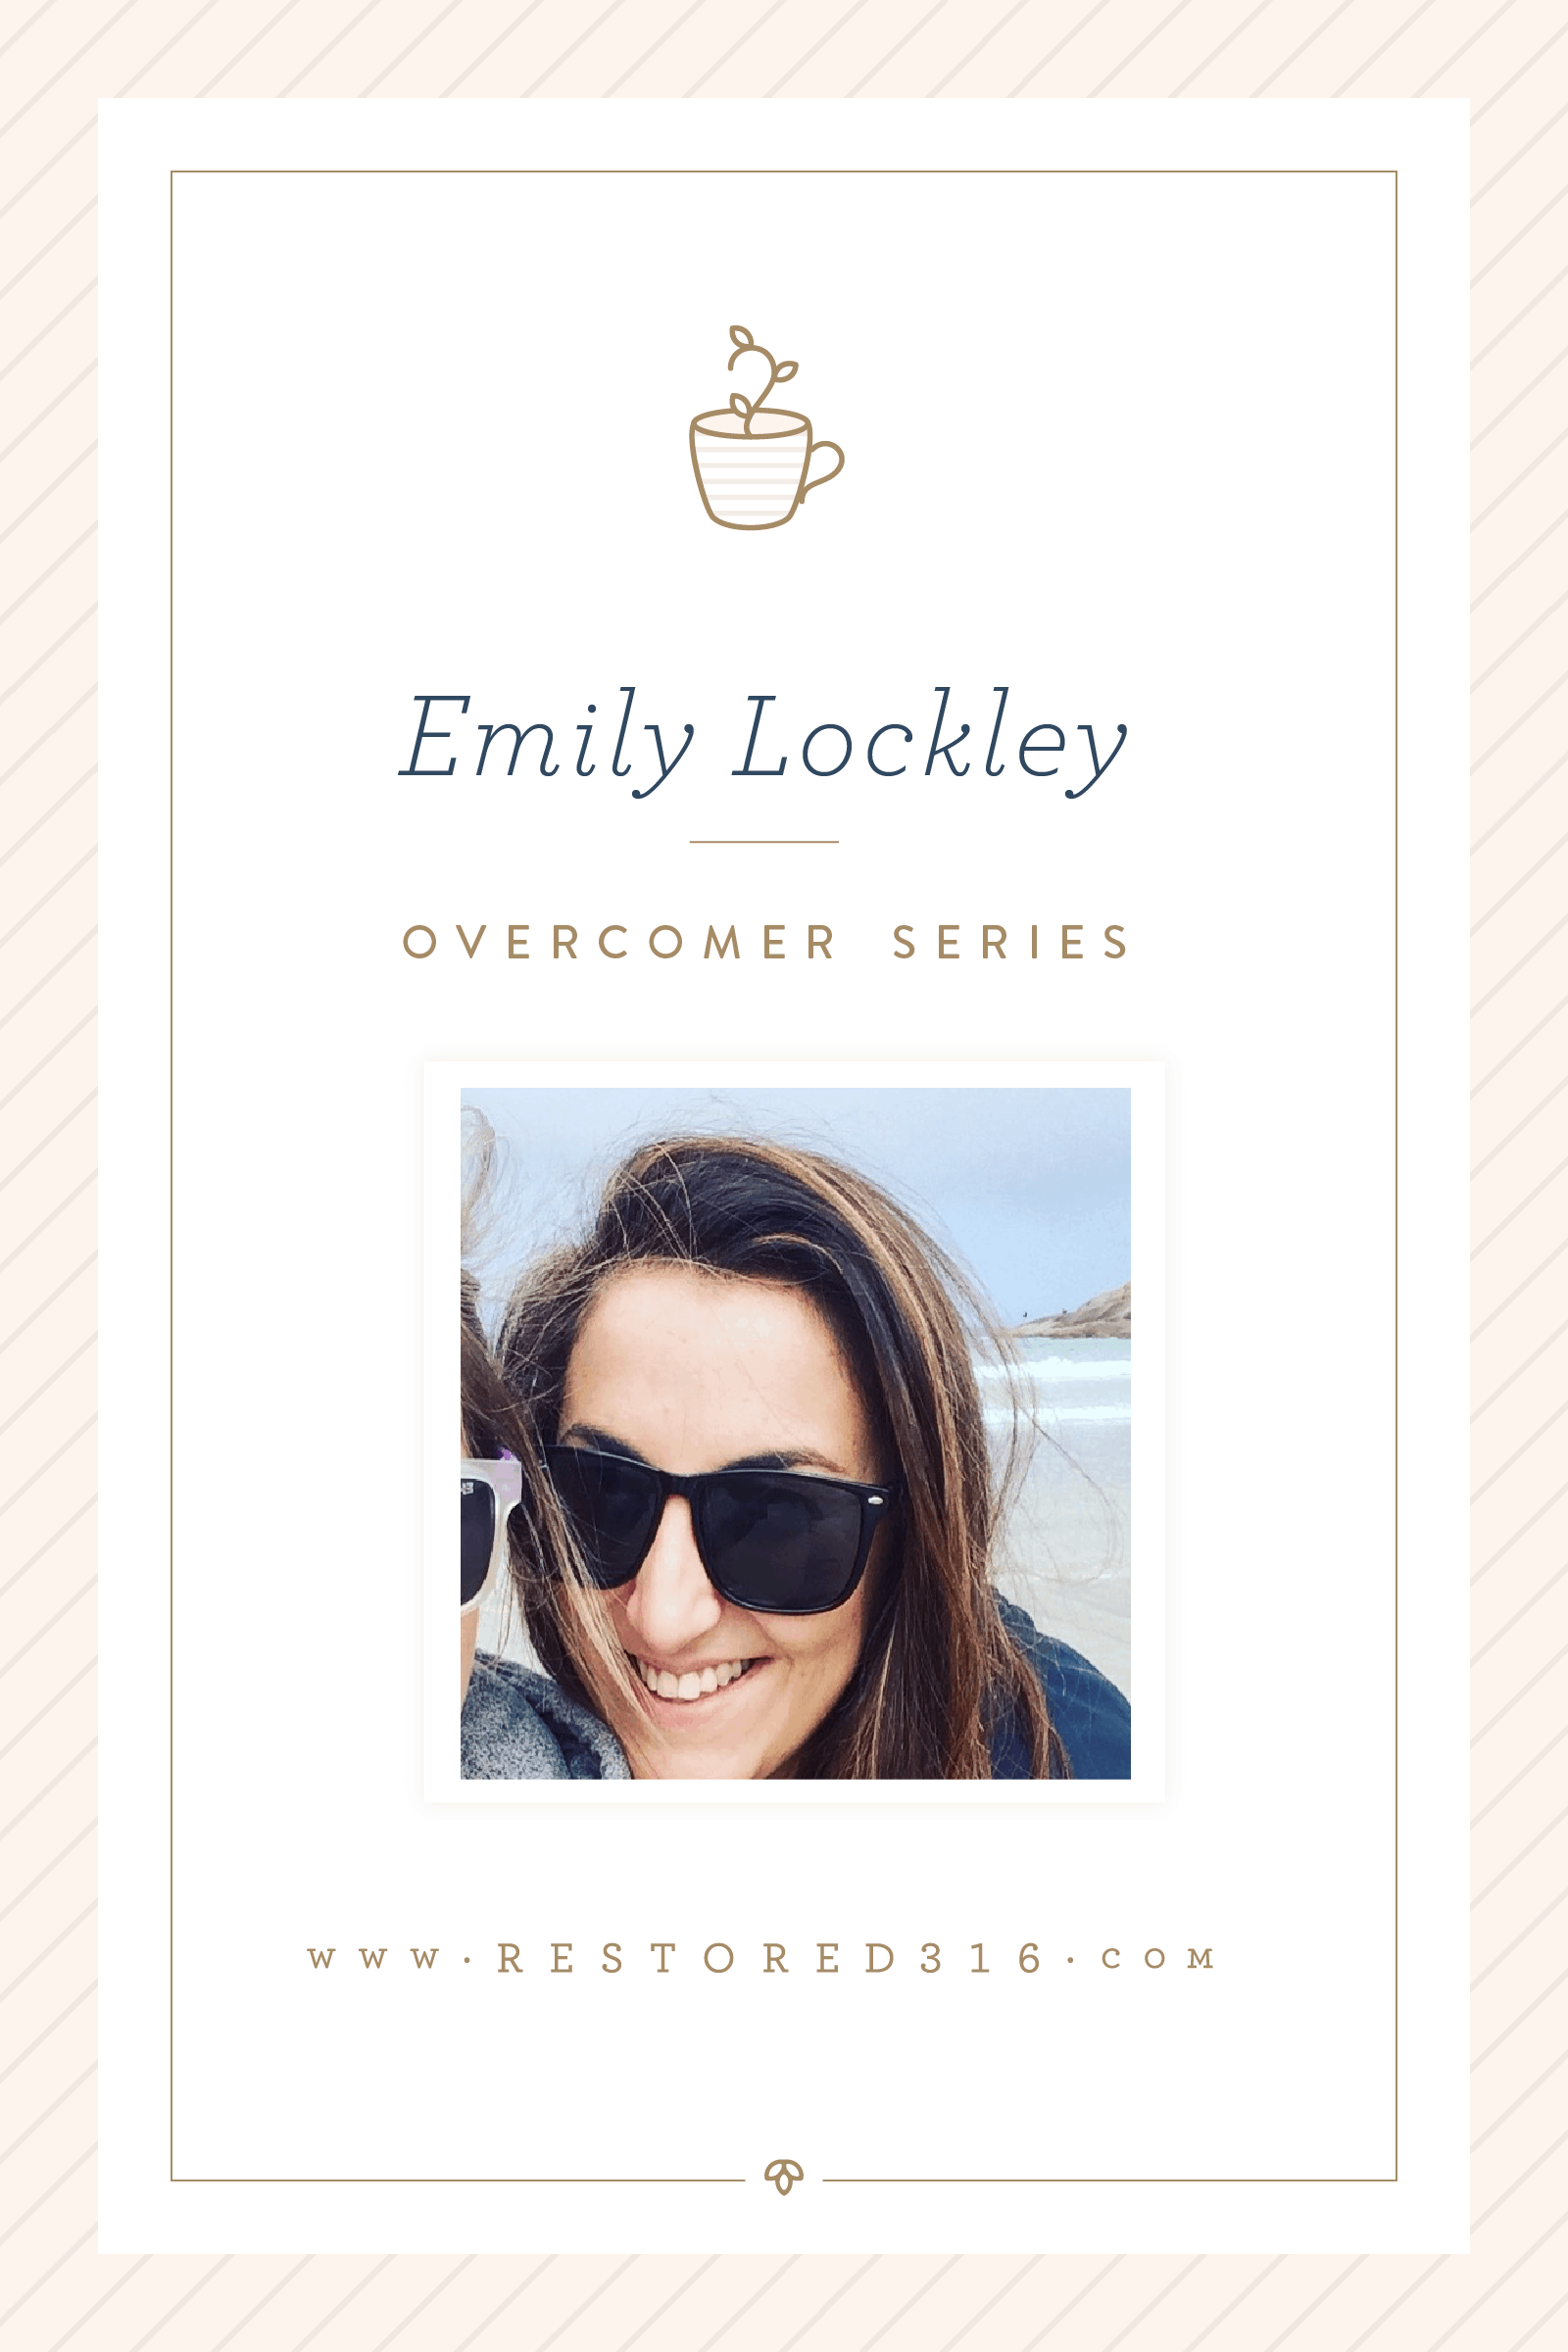 Overcomer Series with Emily Lockley